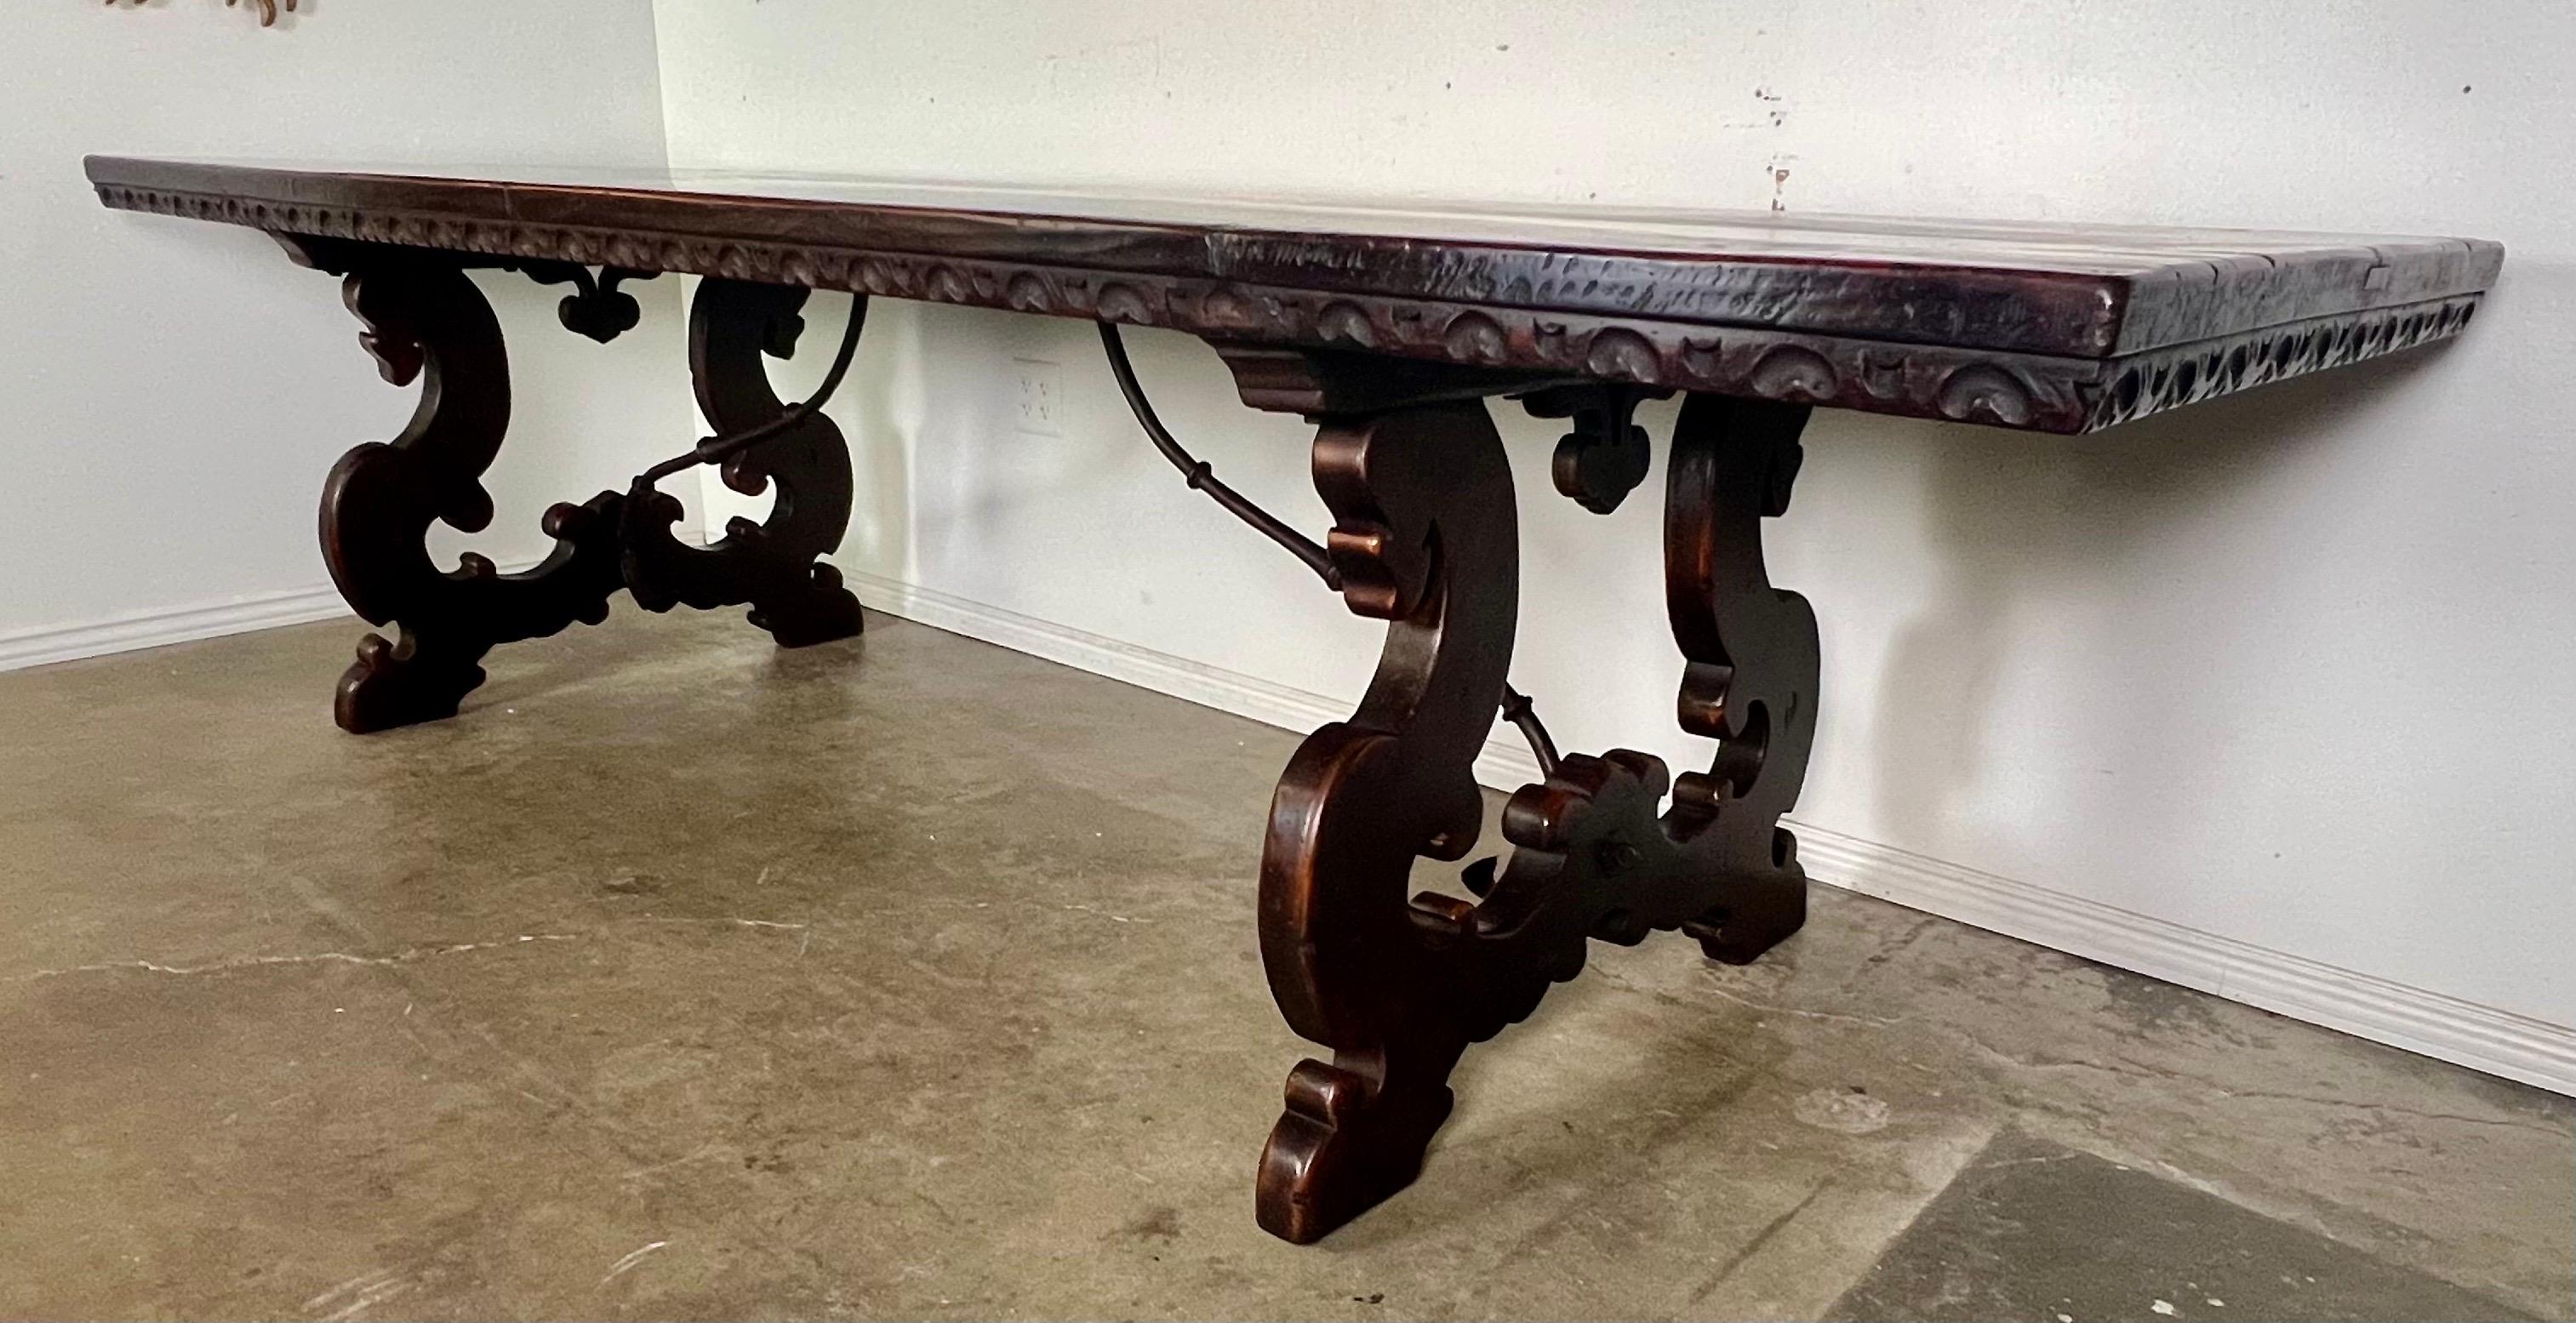 Early 19th-century Italian Baroque style dining table crafted from walnut and featuring lyre-shaped bases.  The iron stretcher adds to its durability and aesthetic appeal, while the Baroque design elements imbue the table with a sense of grandeur